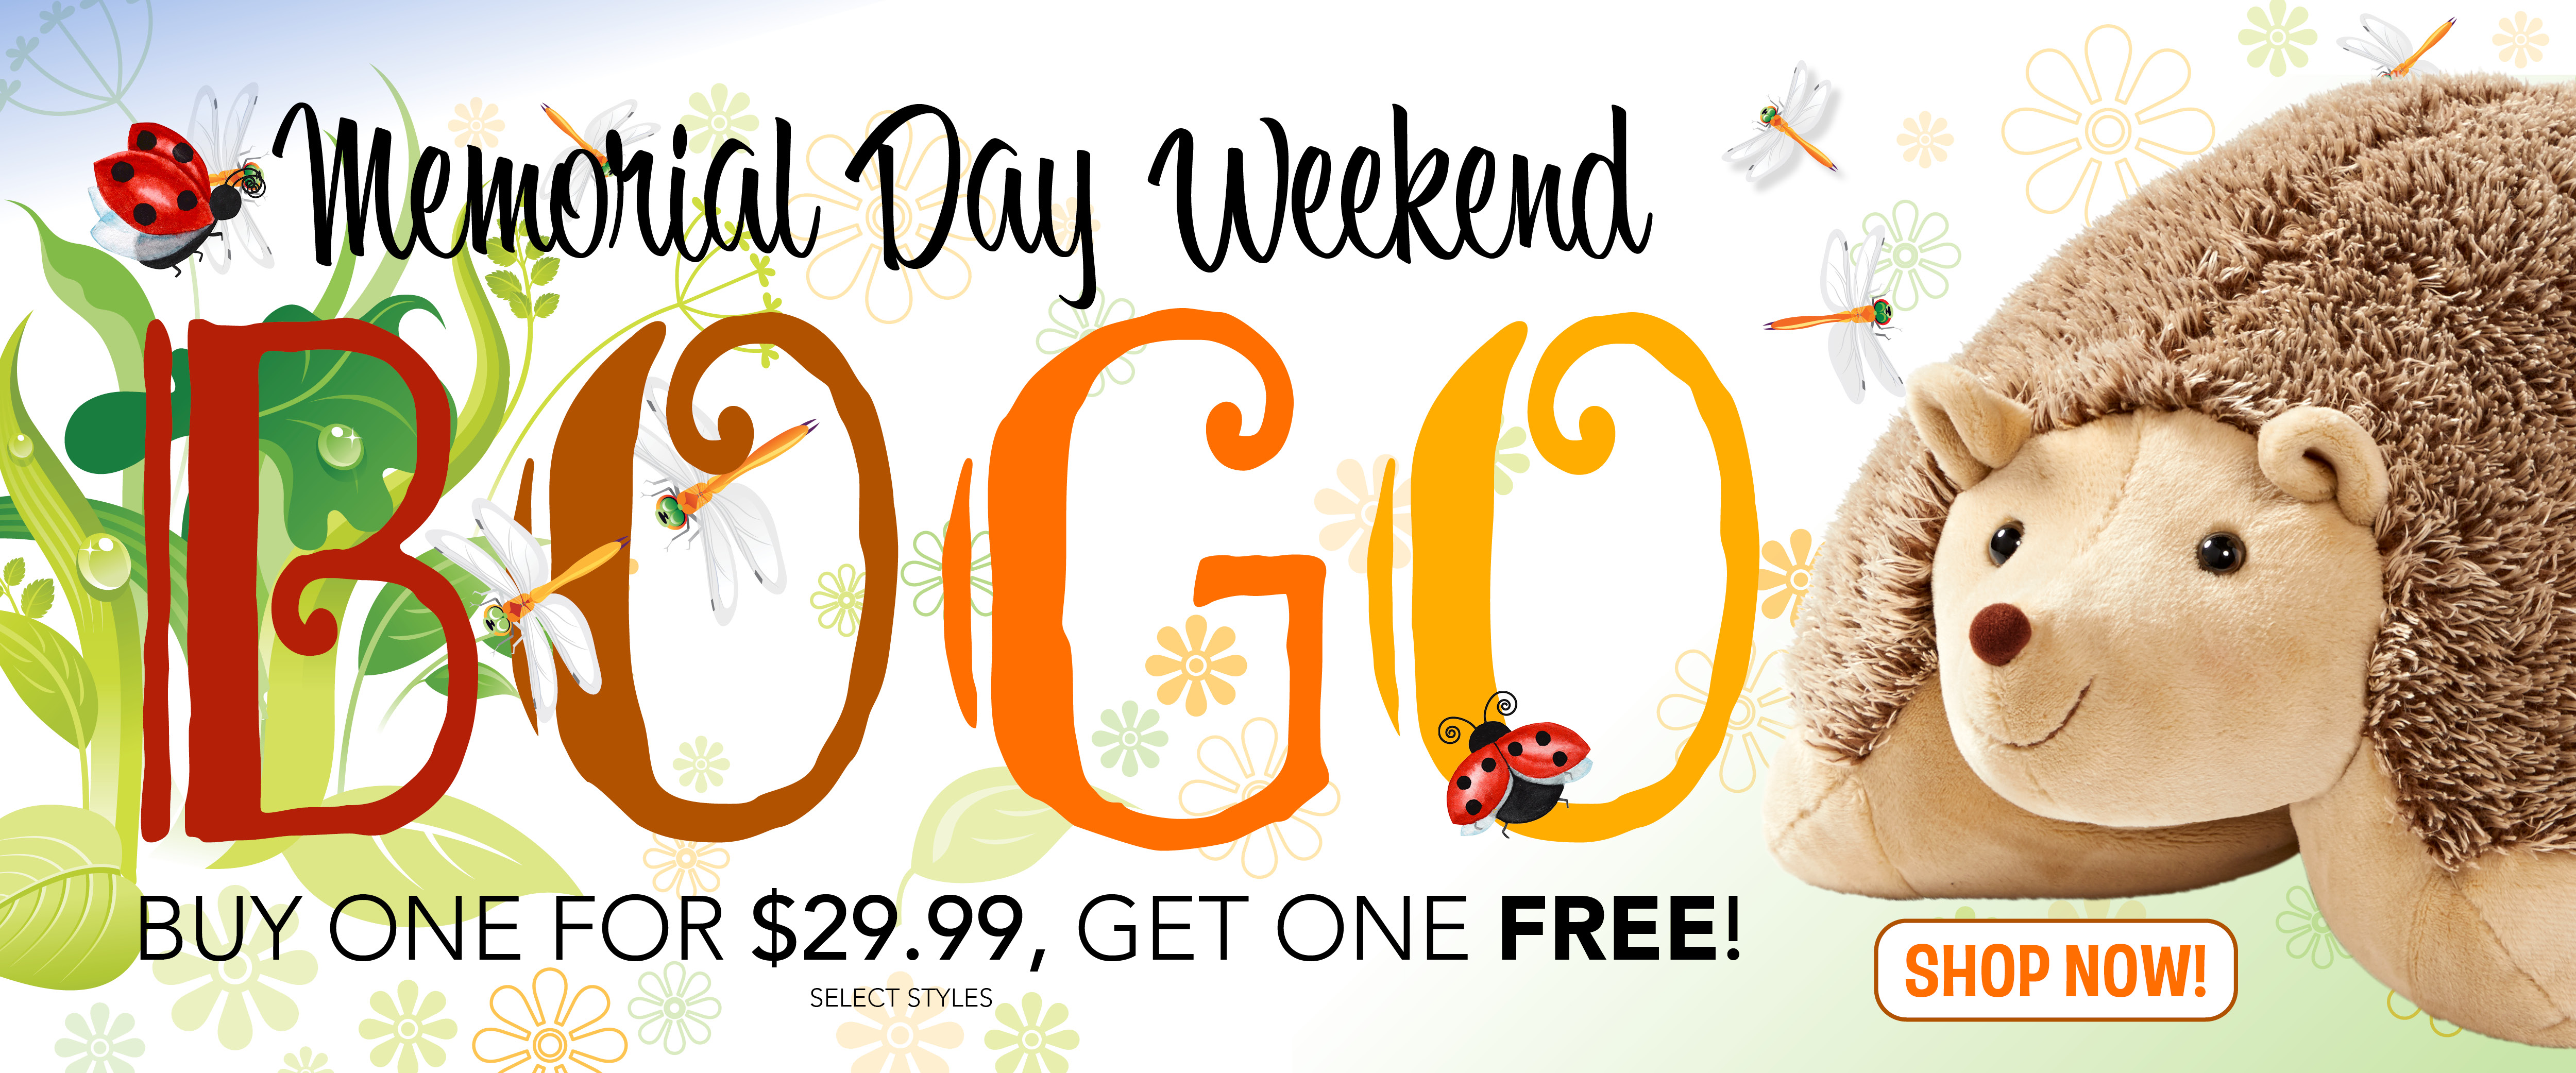 Memorial Day Weekend BOGO! Buy one for $29.99, get one free! Select styles. Shop now!